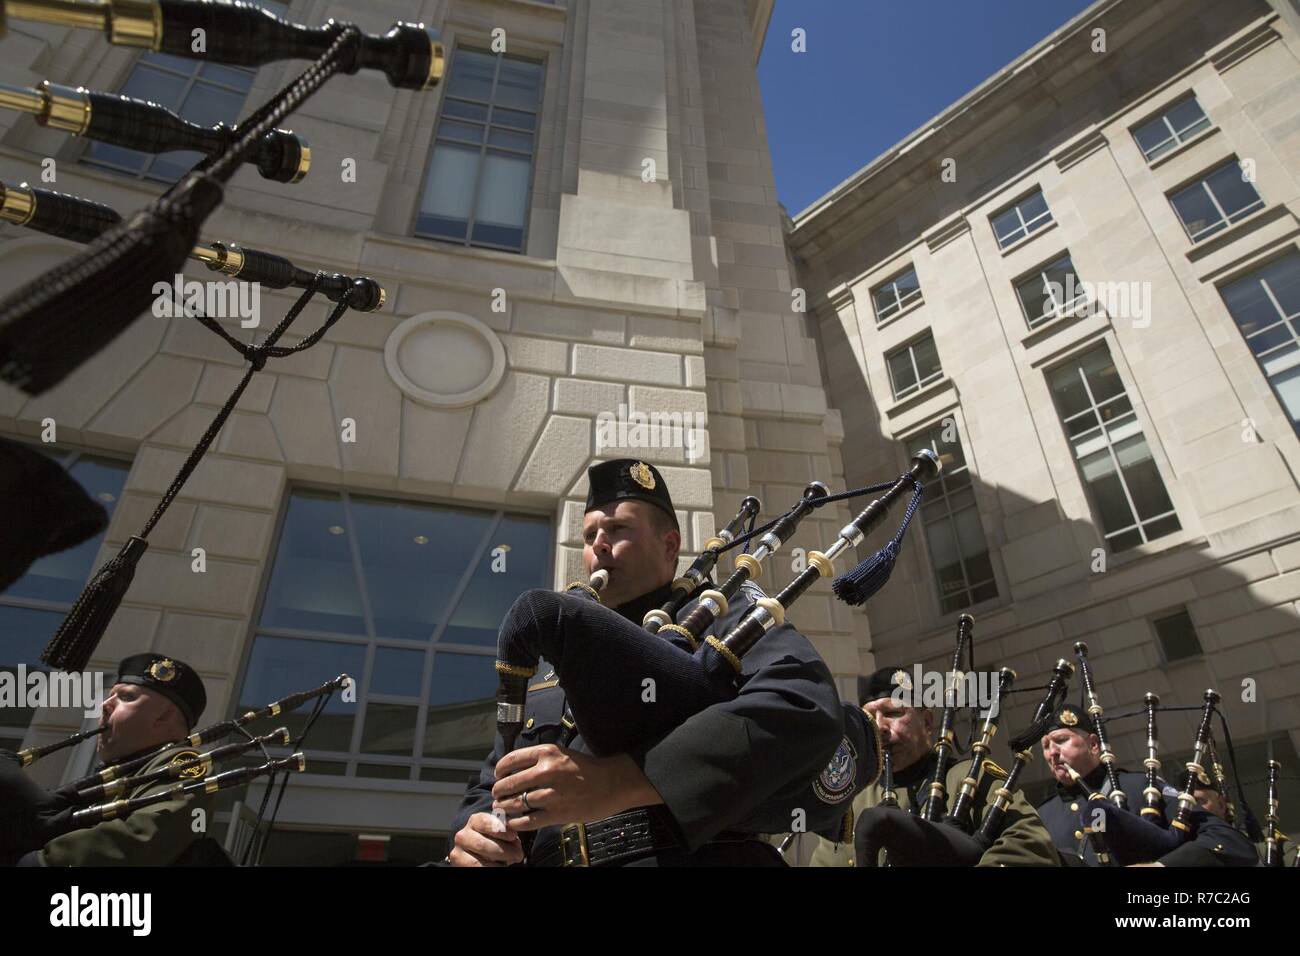 Bagpipes players with the U.S. Border Patrol Pipes and Drums march into position during the U.S. Customs and Border Protection Valor Memorial and Wreath Laying Ceremony in Woodrow Wilson Plaza at the Ronald Reagan Building in Washington, D.C., May 16, 2017. U.S. Customs and Border Protection Stock Photo